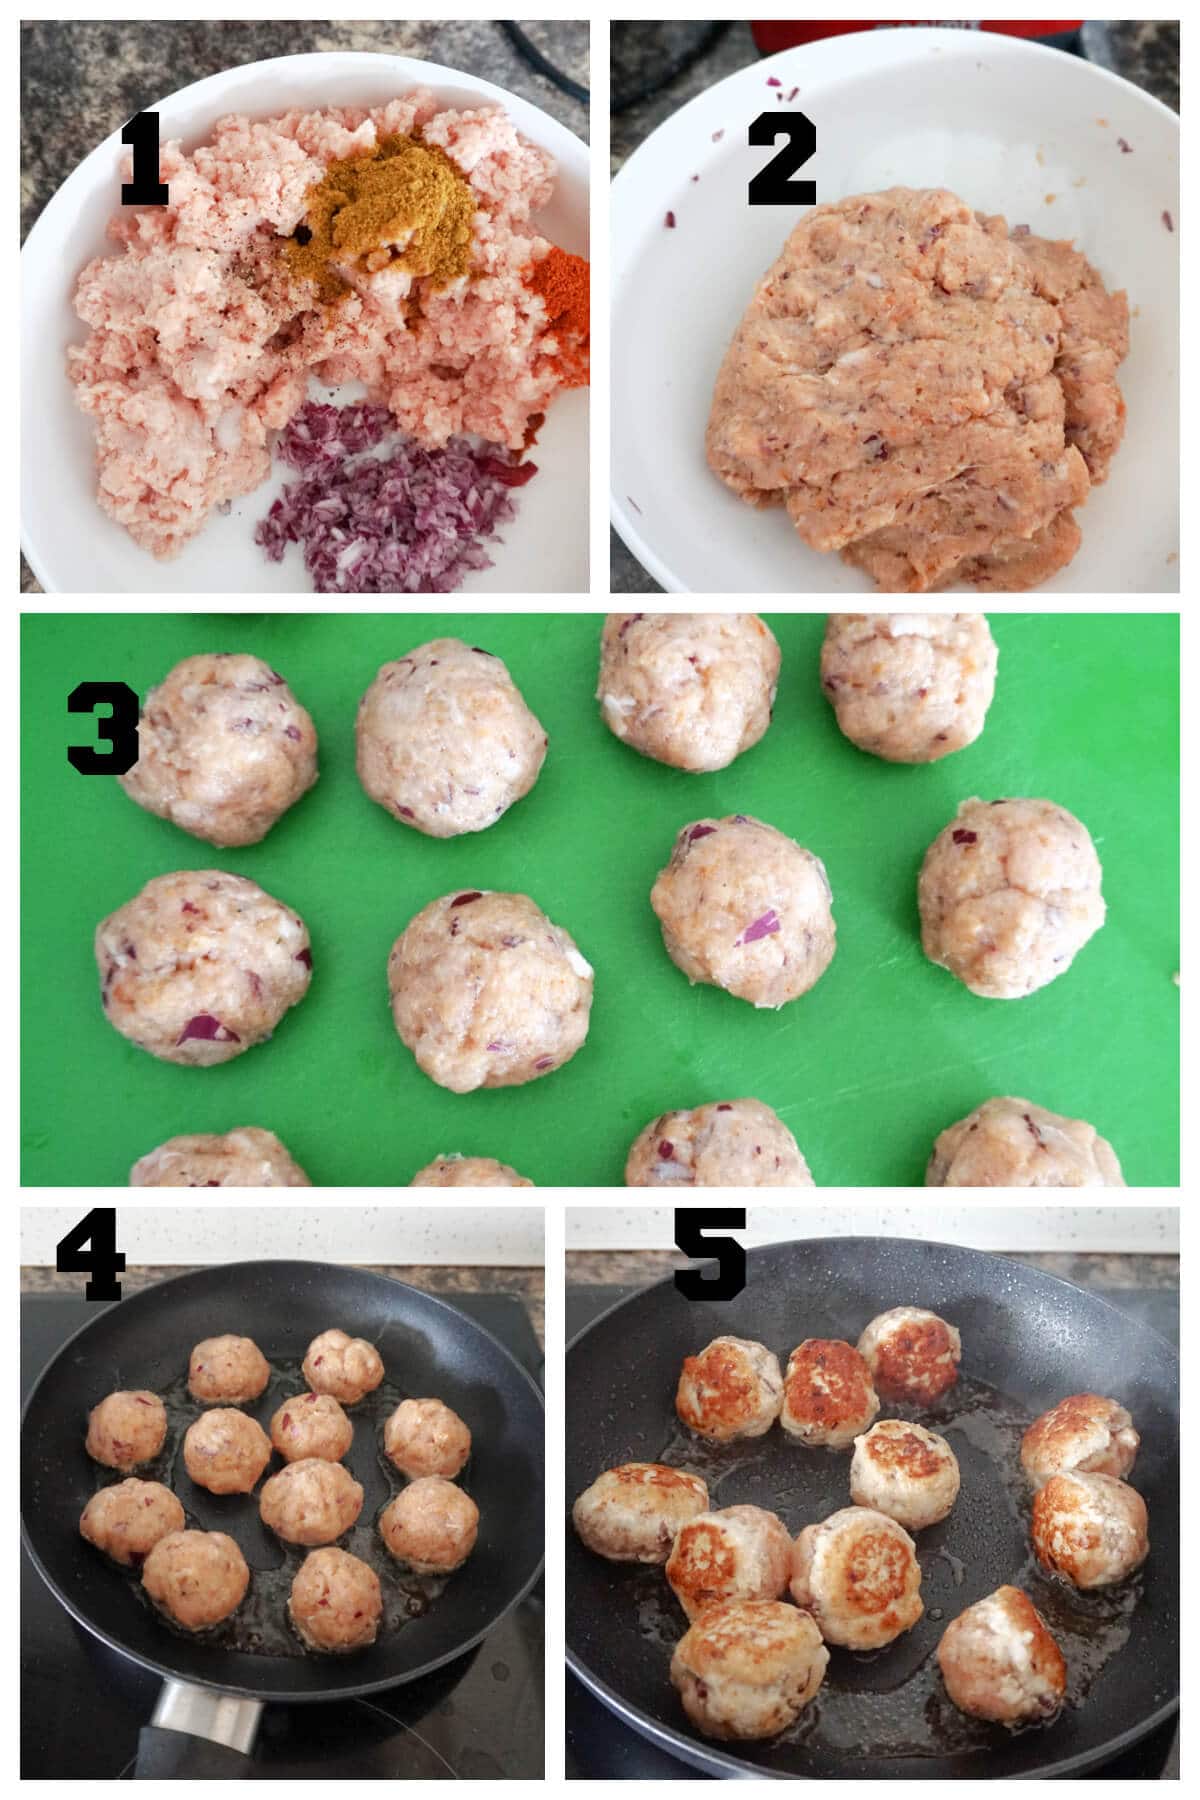 Collage of 5 photos to show how to make the turkey meatballs.